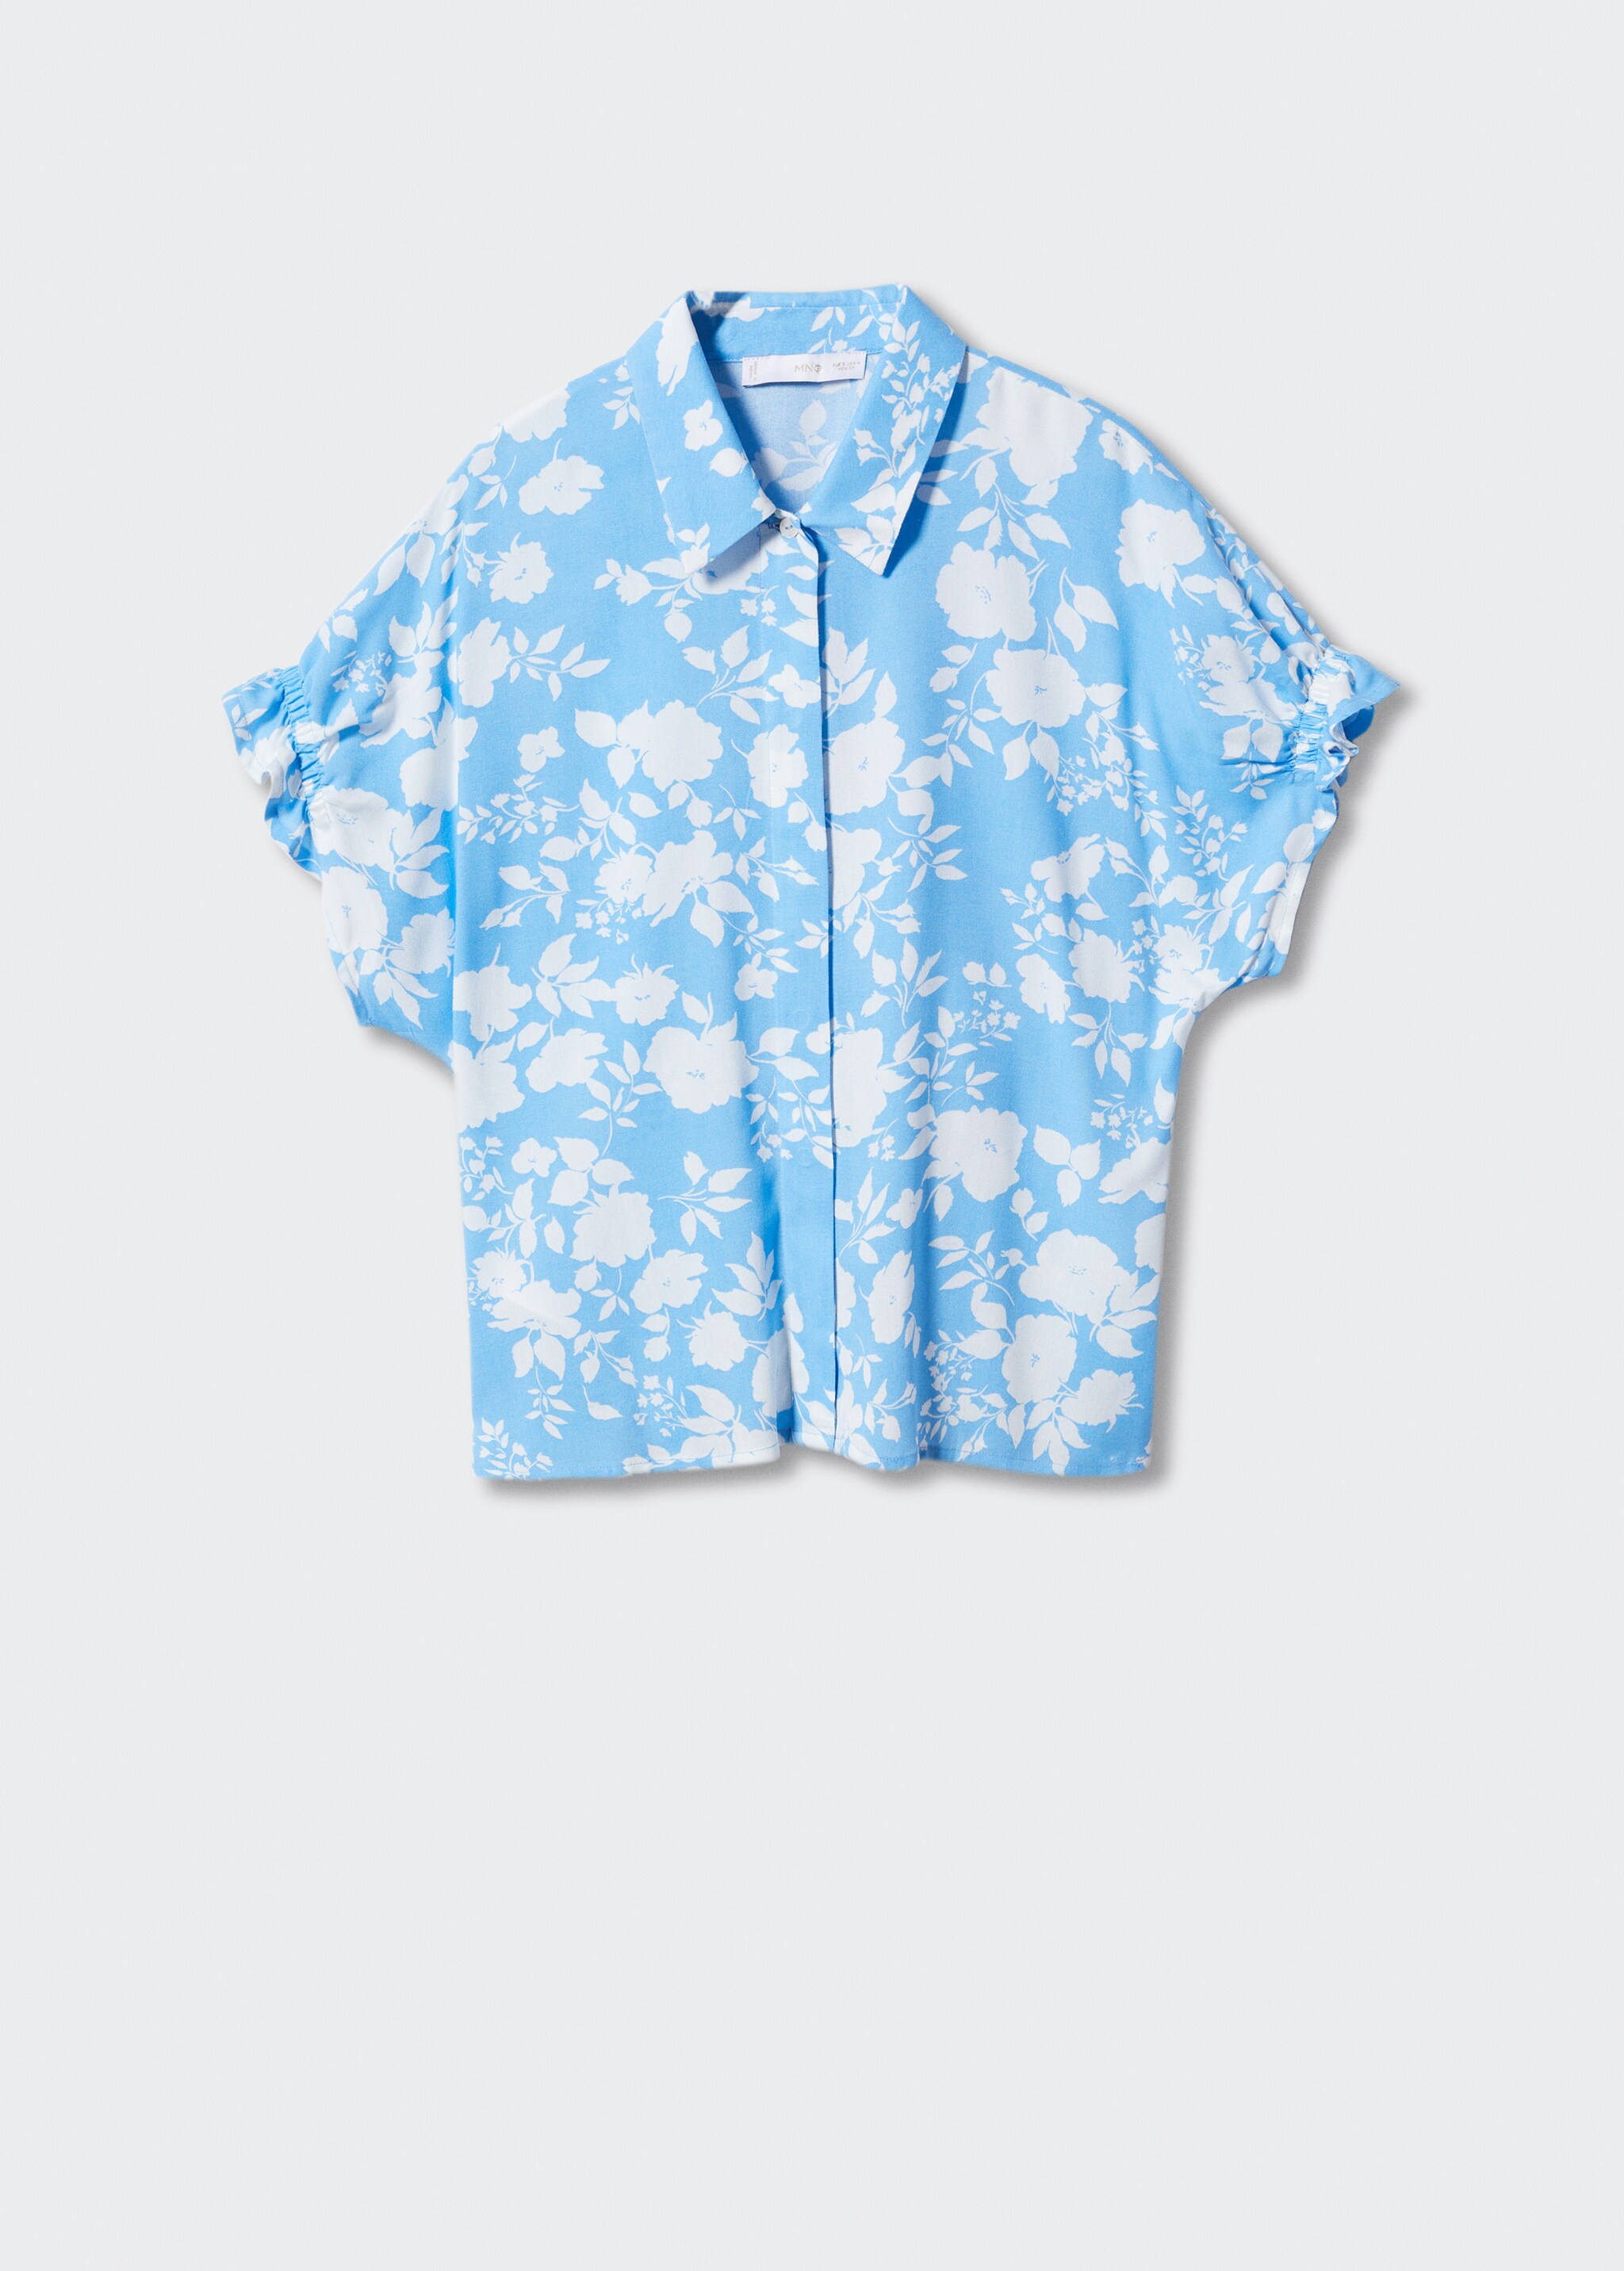 Flowers printed shirt - Article without model